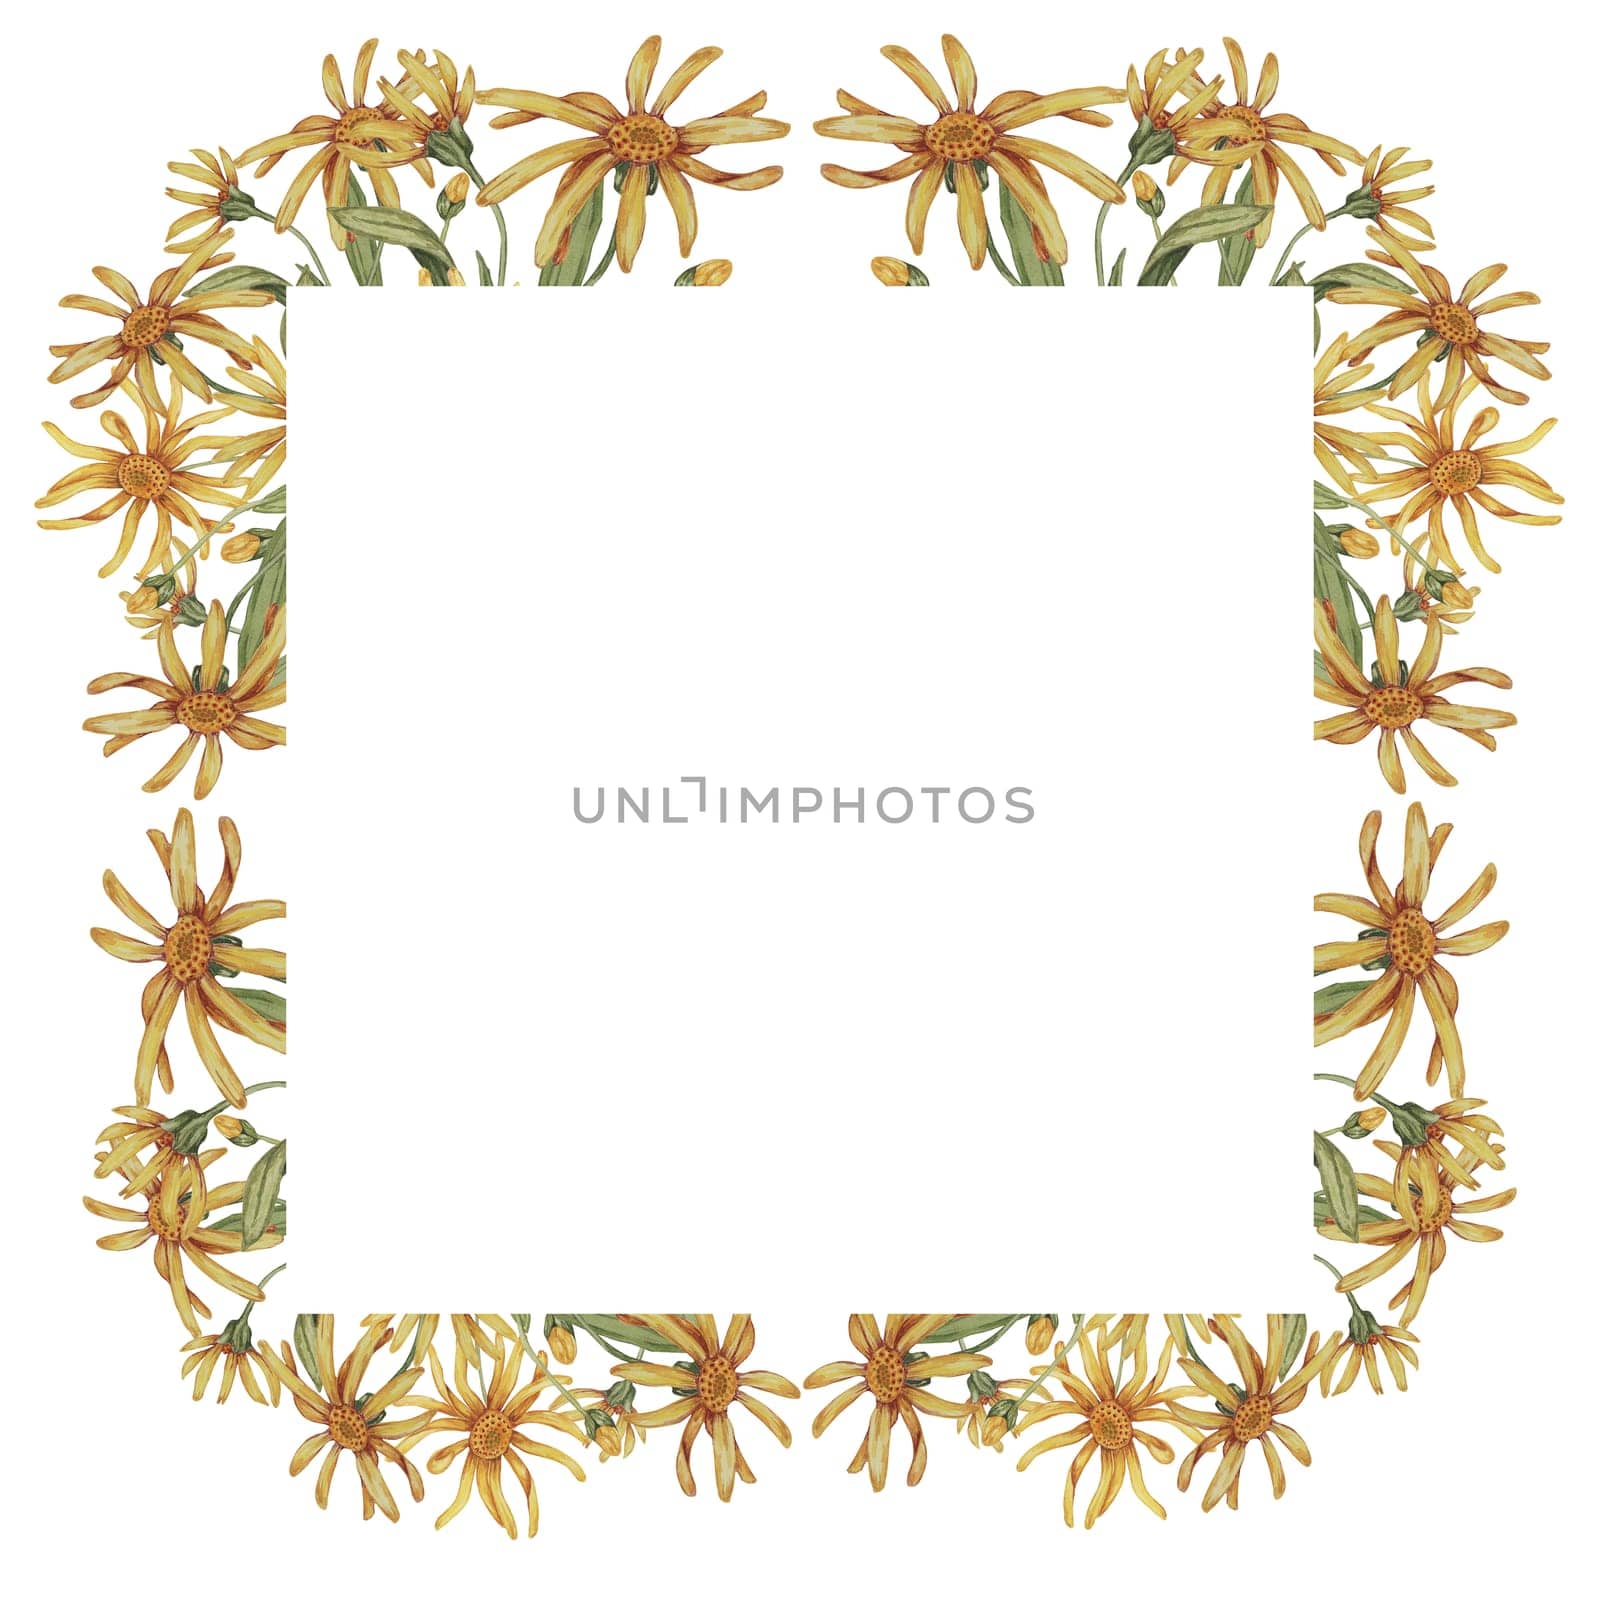 Arnica flowers in a square frame template. Mountain tobacco watercolor illustration, isolated for printing, greeting card, quote, gift tag, labels in cosmetics, herbal medicine, creams, ointments